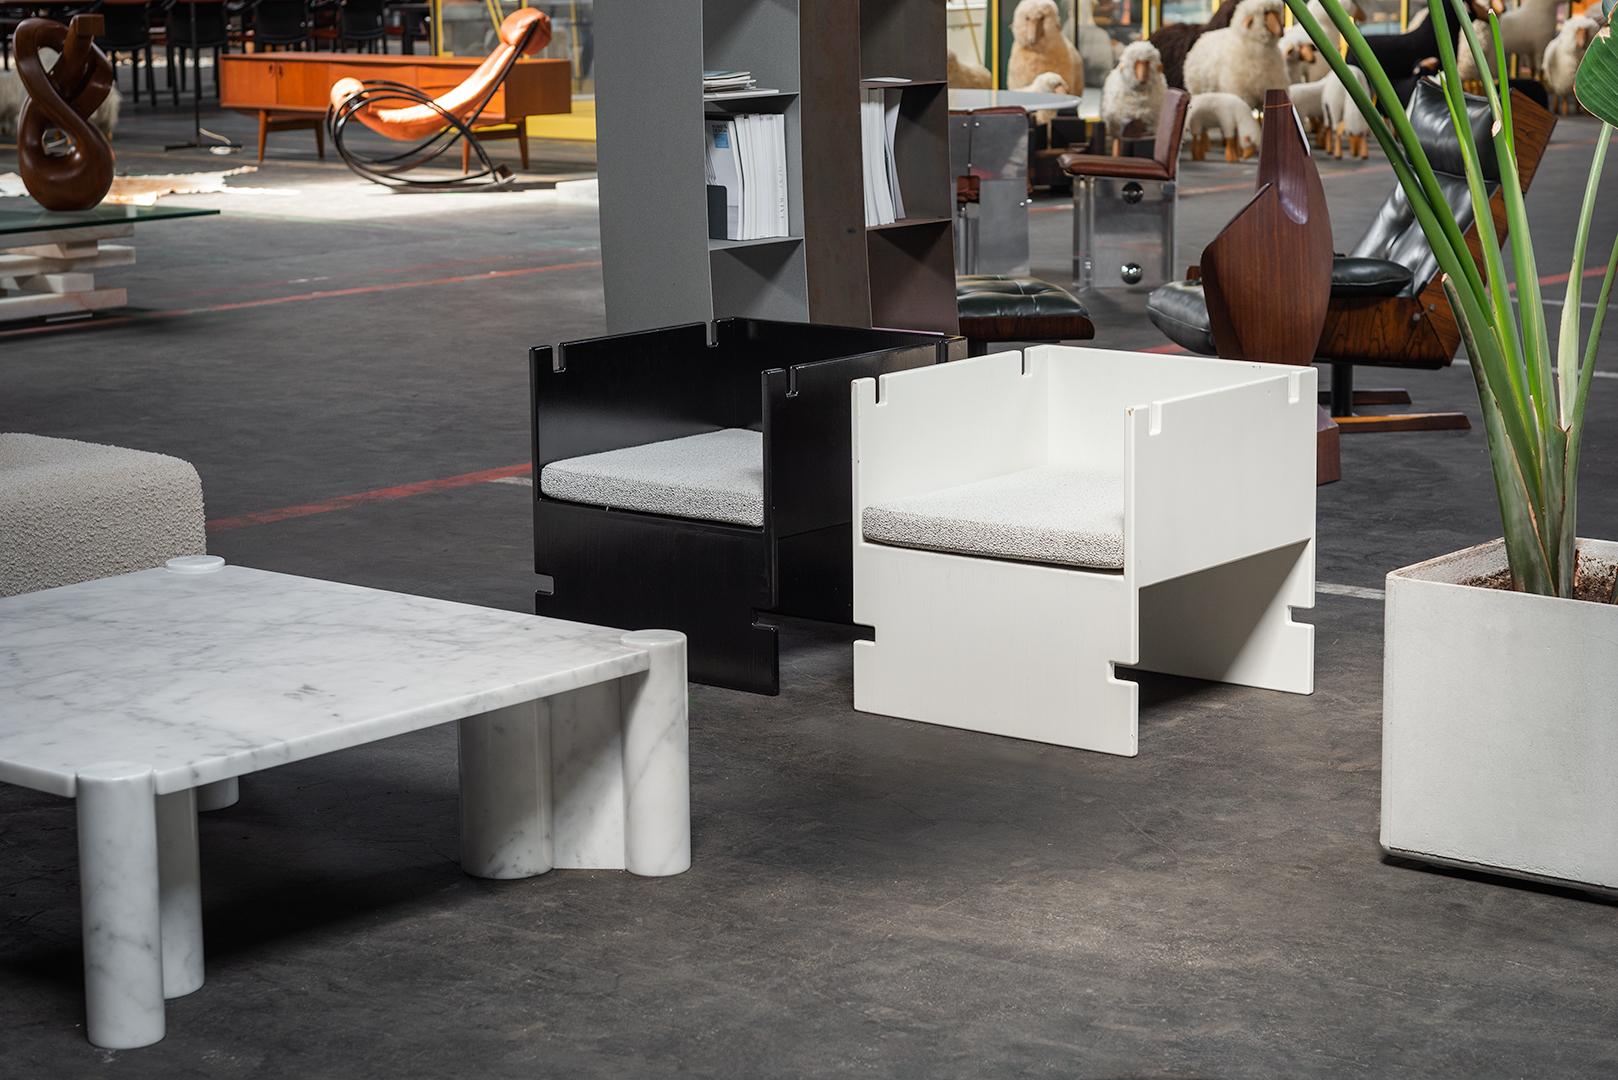 Iconic Jumbo coffee table designed by Gae Aulenti and manufactured by Knoll International in Italy in 1964. It's made from gorgeous white Carrara marble, known for its beautiful white colour with elegant grey veins running through it. What makes